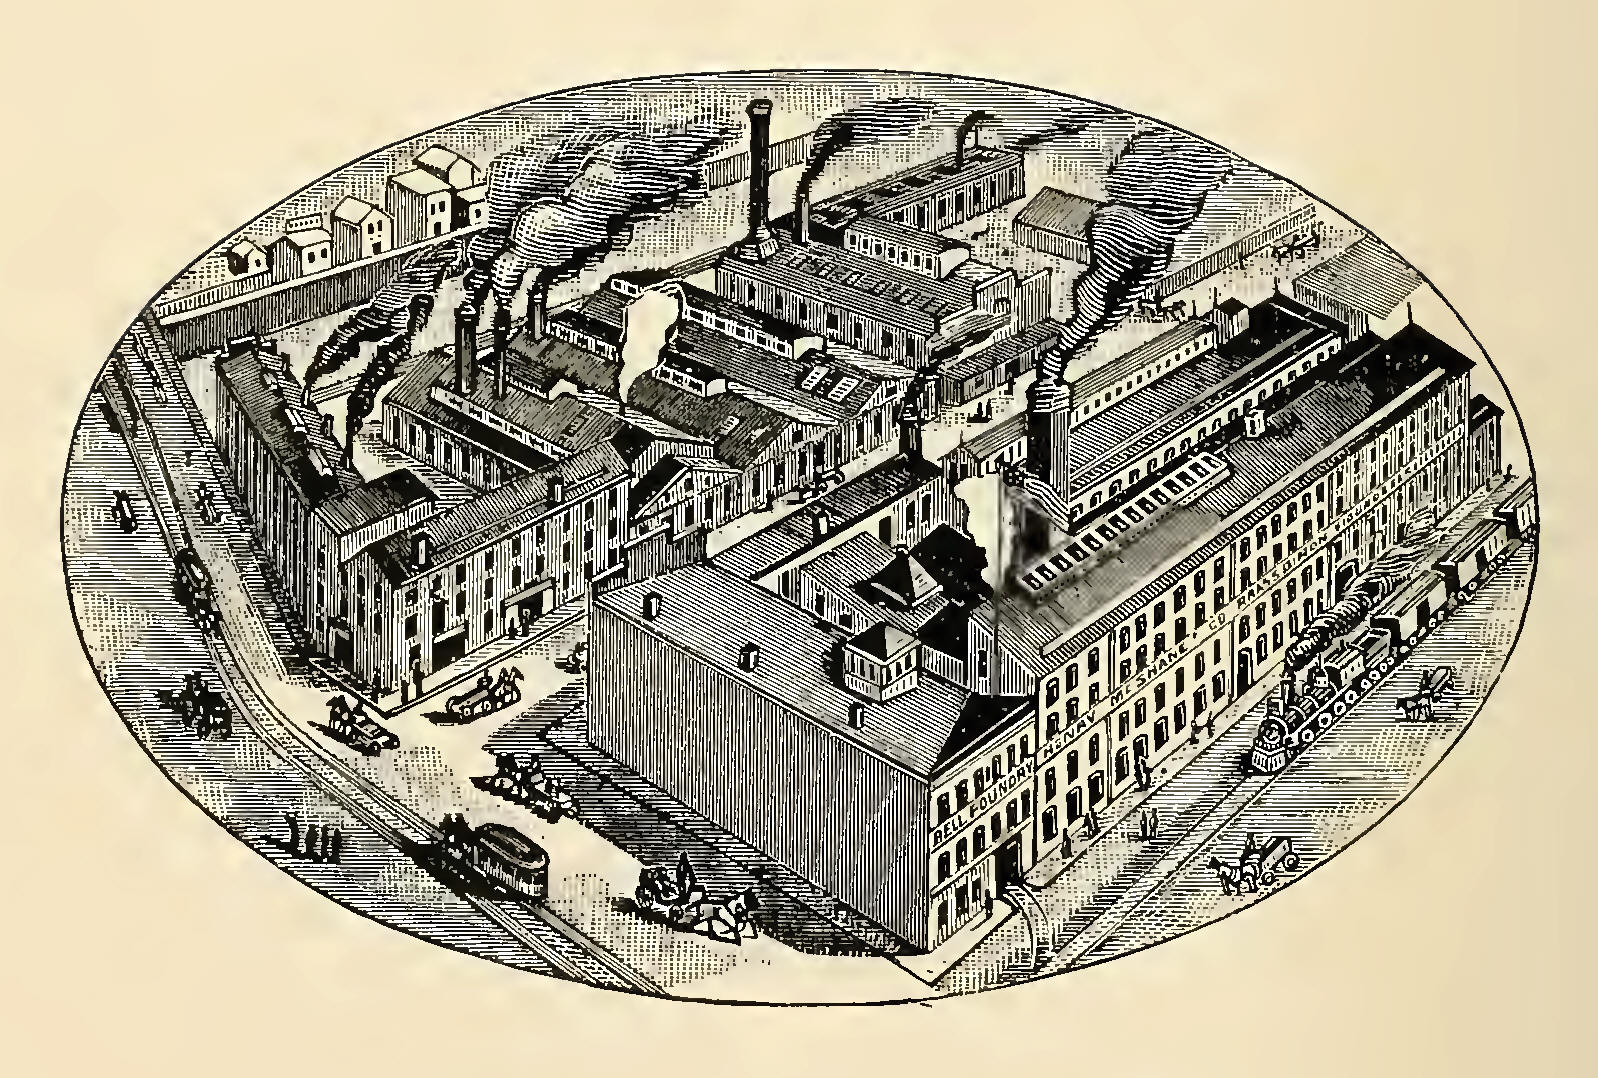 McShane's Bell Foundry, Baltimore, Maryland